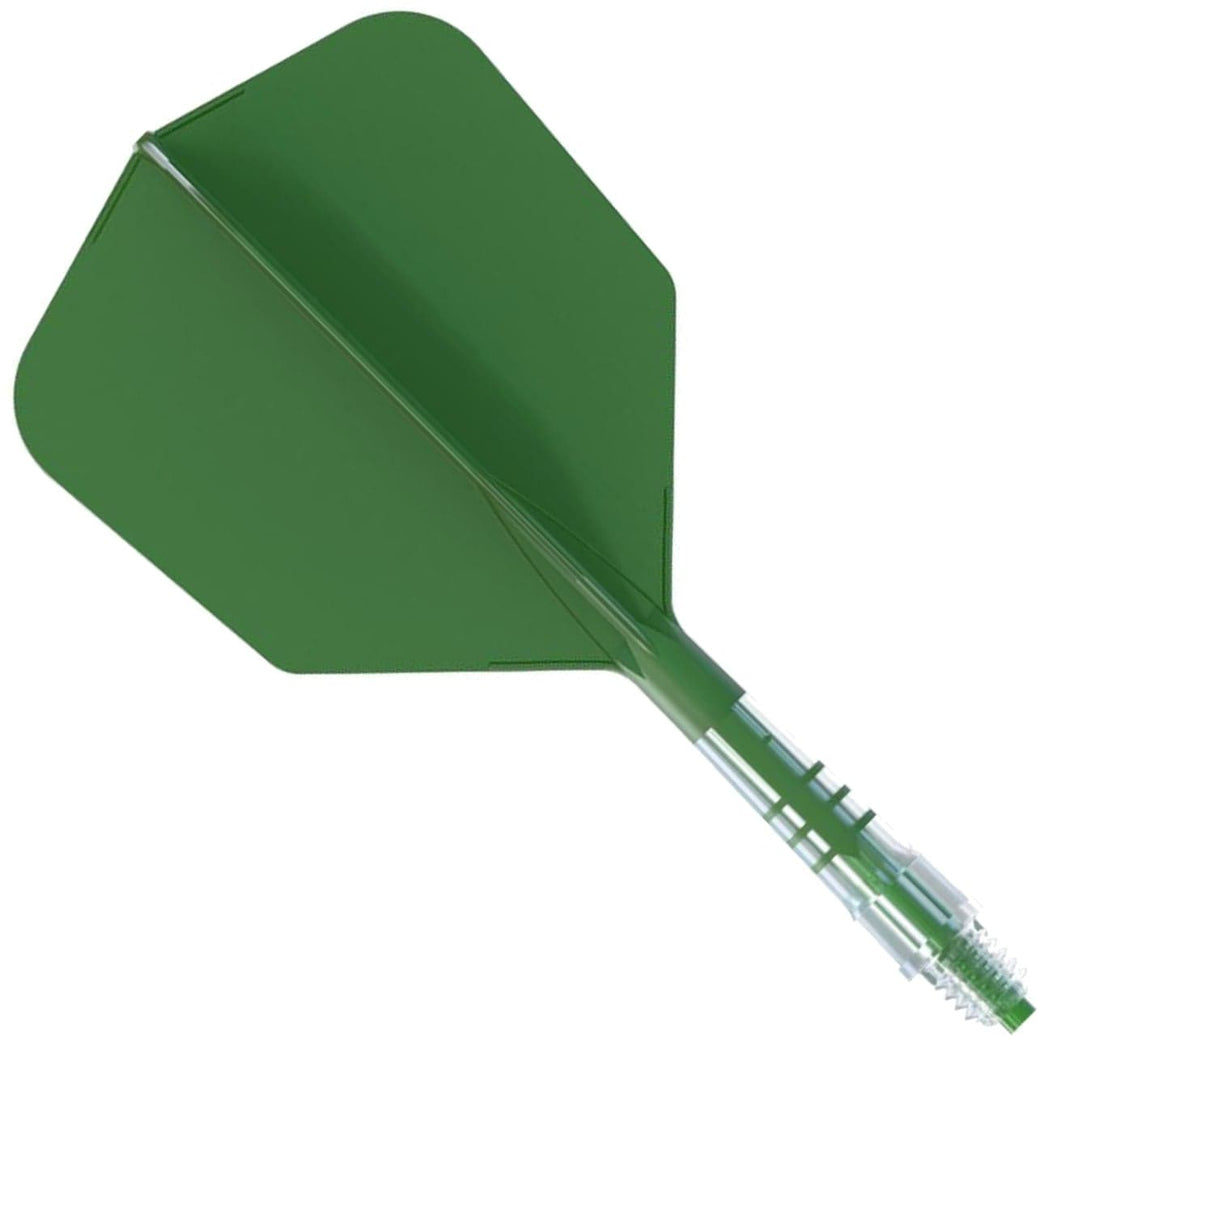 Cuesoul Rost T19 Carbon Fibre - Integrated Dart Shaft and Flights - Big Wing - Green Size 1